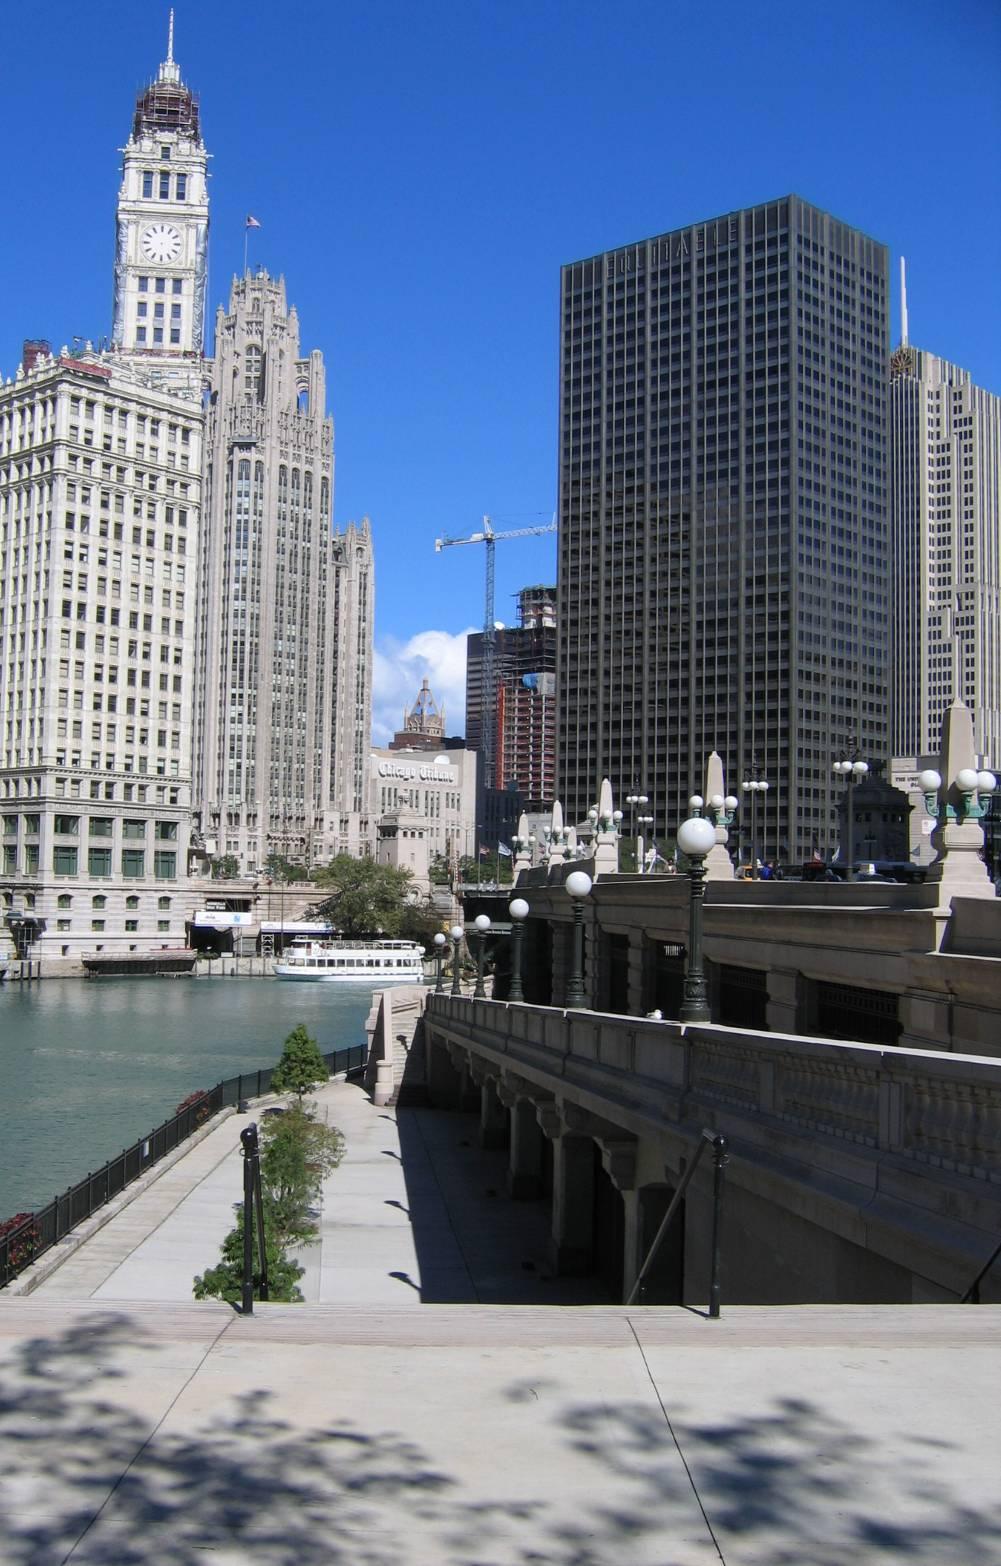 Wacker Drive Reconstruction City Role: Lead Timeframe: E/W portion completed N/S leg requires funding (2008-2012) Cost Estimate: $350M for N/S leg Potential Funding Sources: State/local bonds, TIF